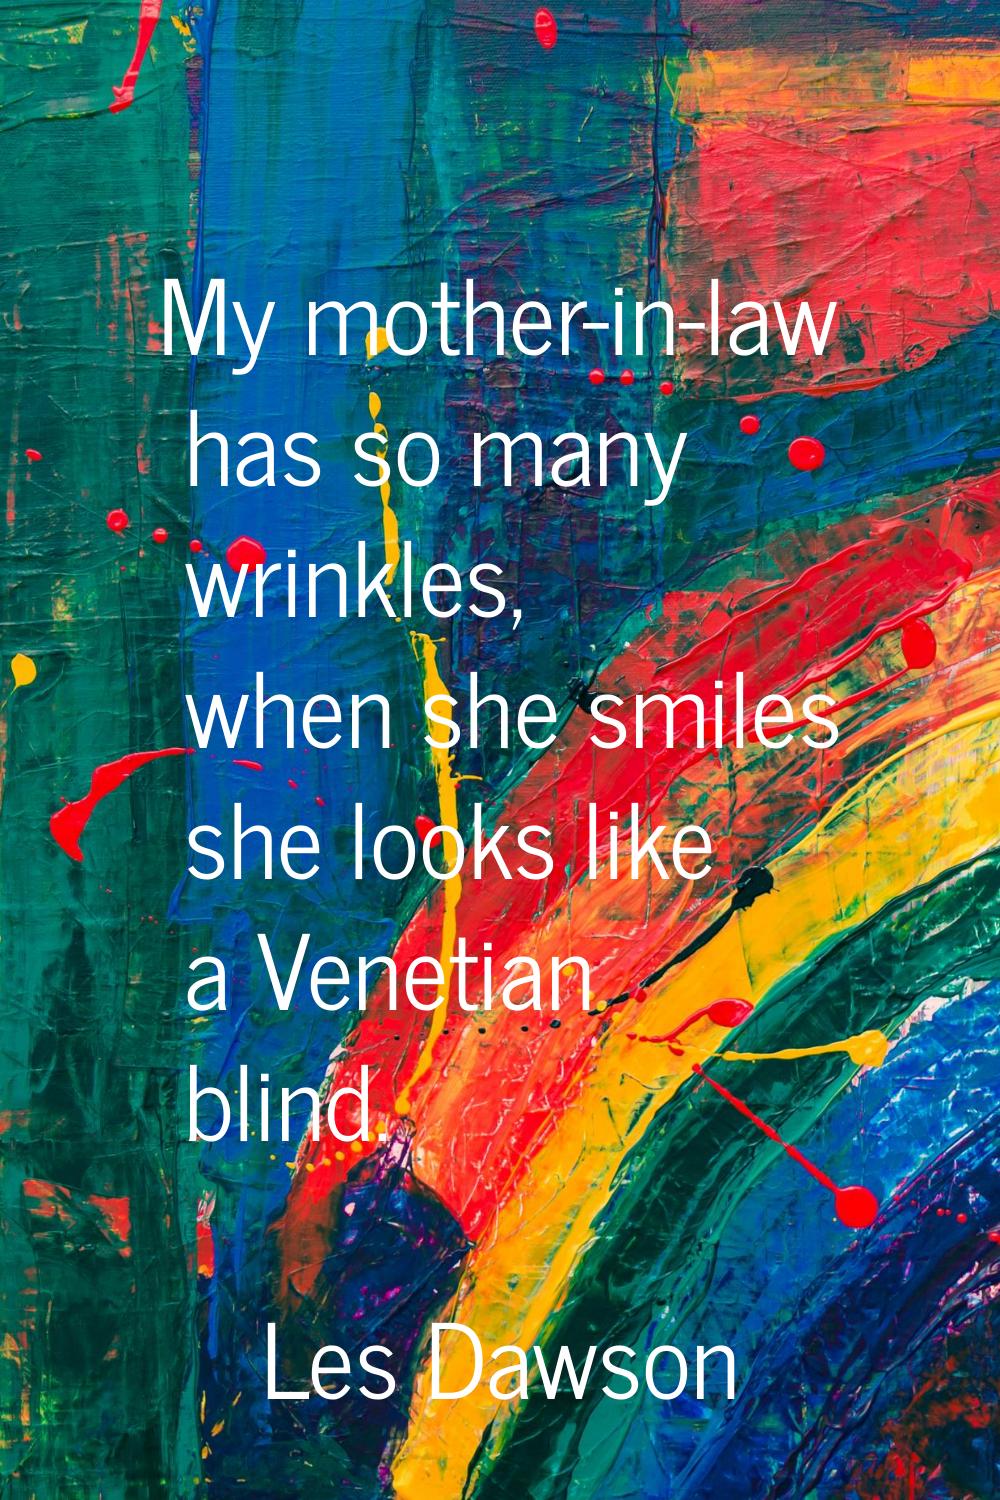 My mother-in-law has so many wrinkles, when she smiles she looks like a Venetian blind.